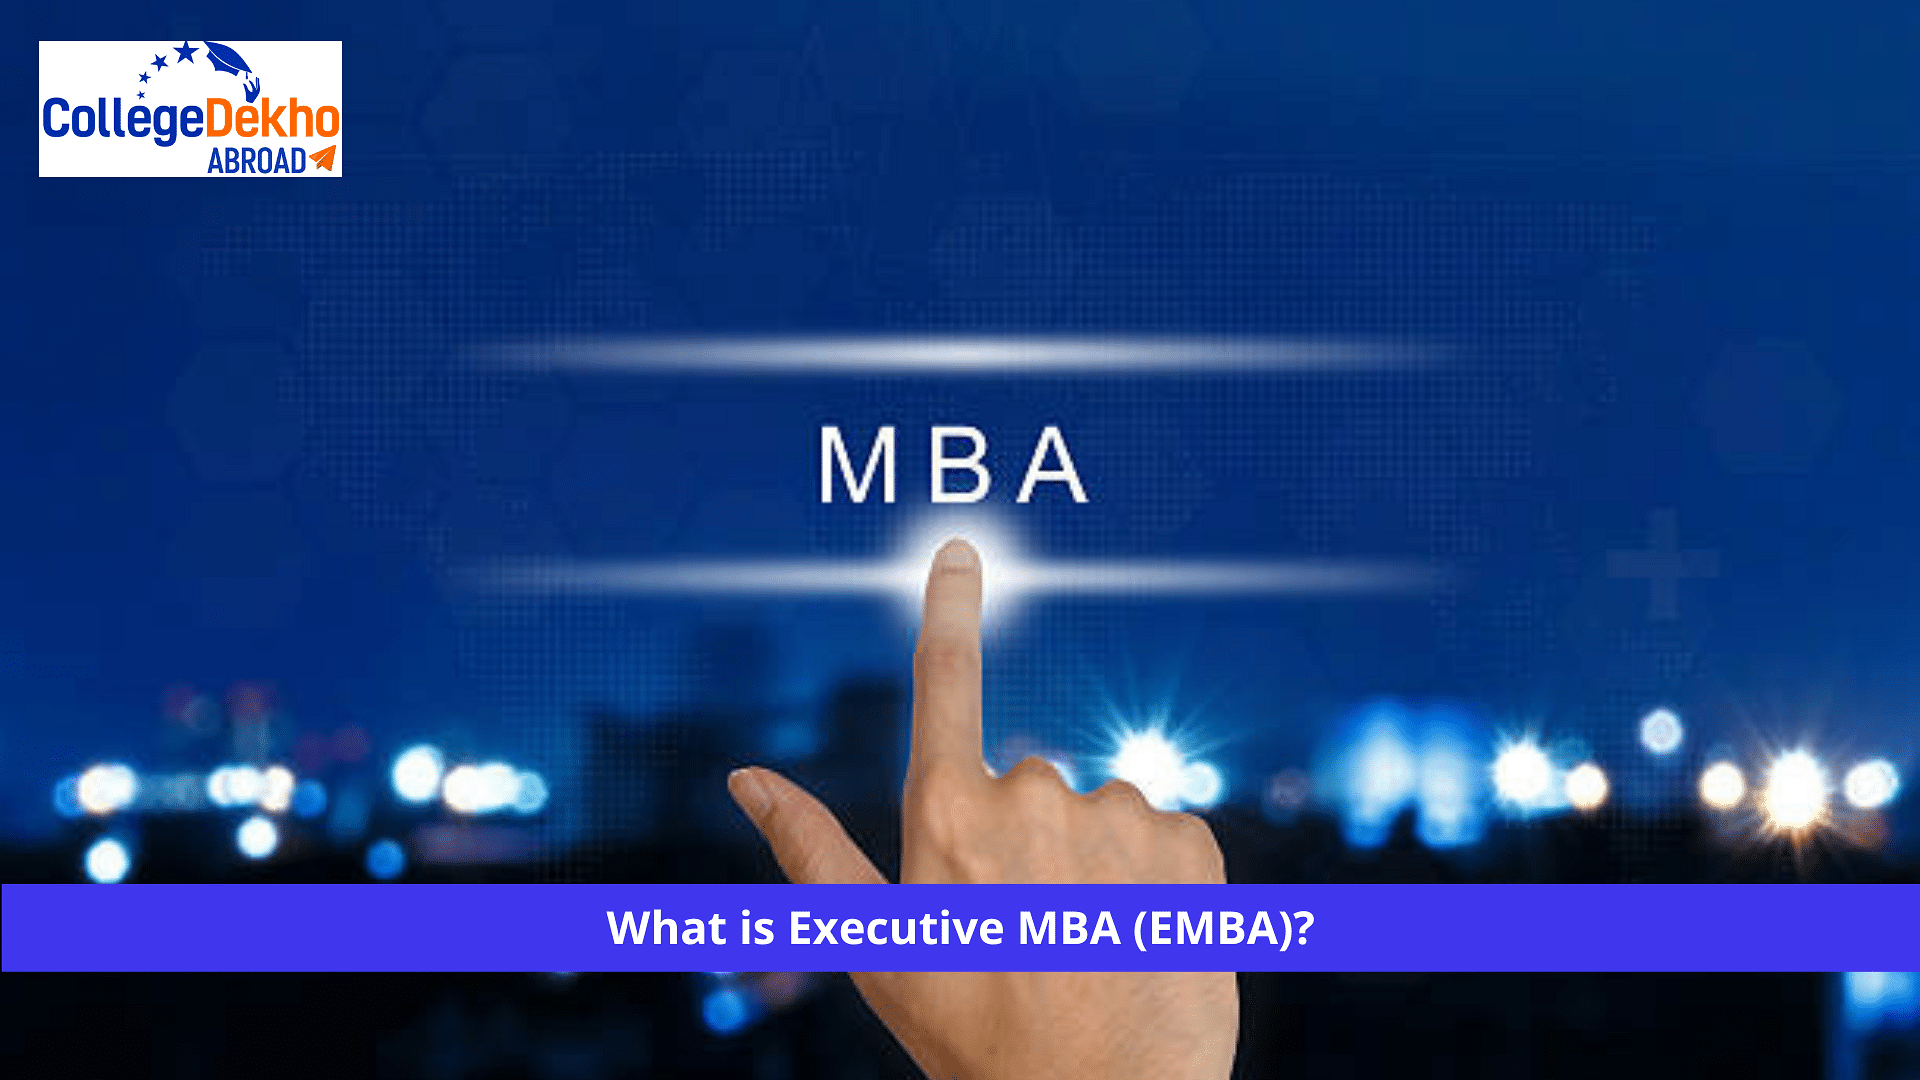 What is Executive MBA (EMBA)?